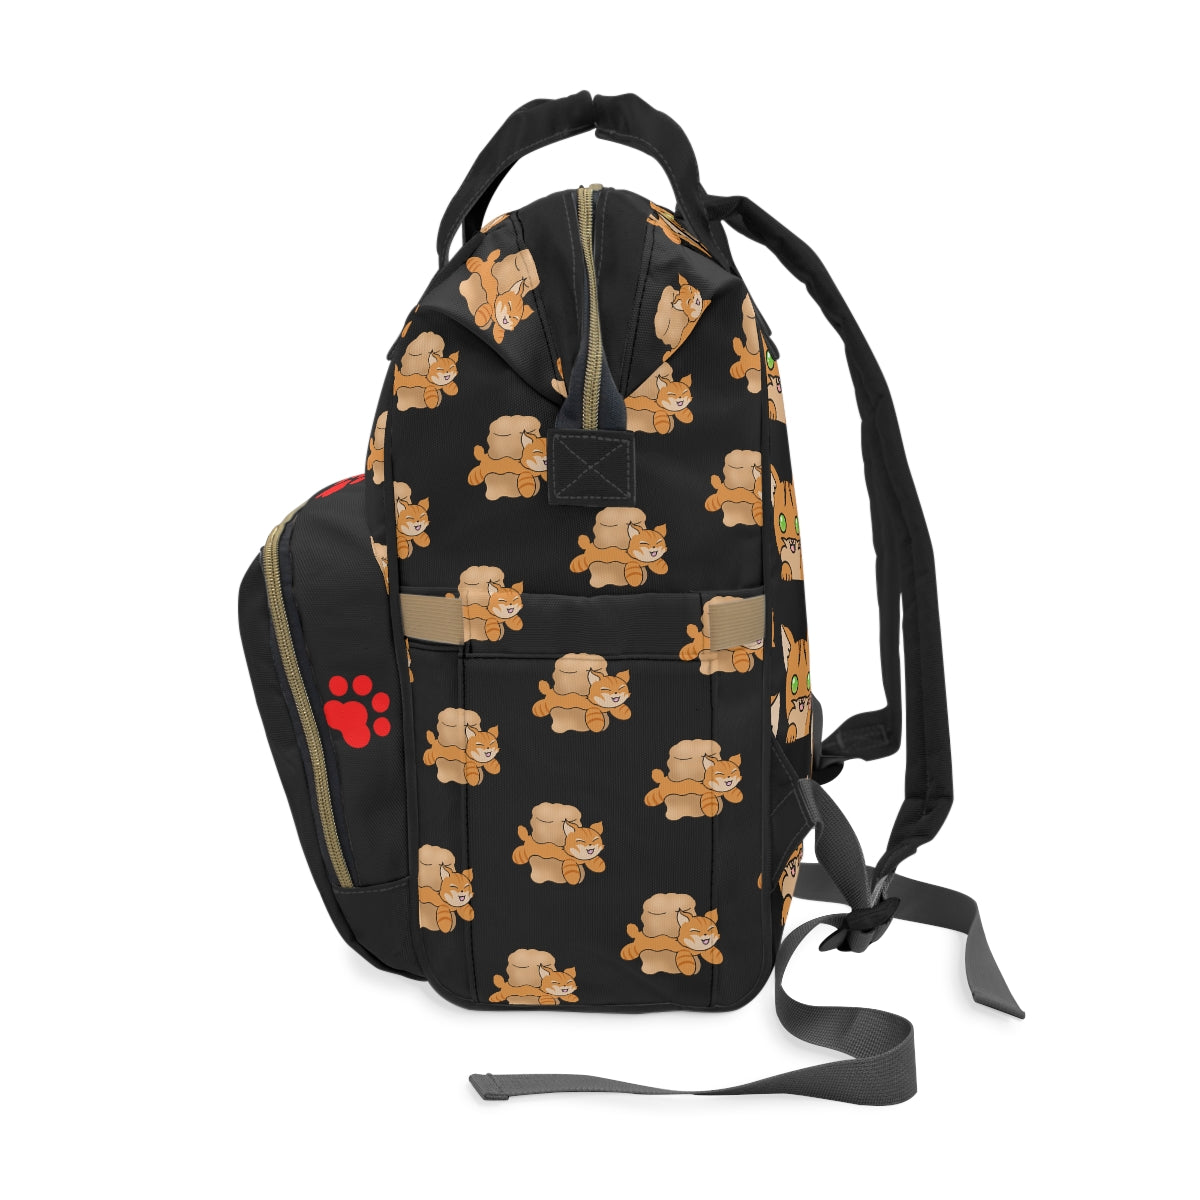 Stand out  with the  Multifunctional Backpack  available at Hey Nugget. Grab yours today!